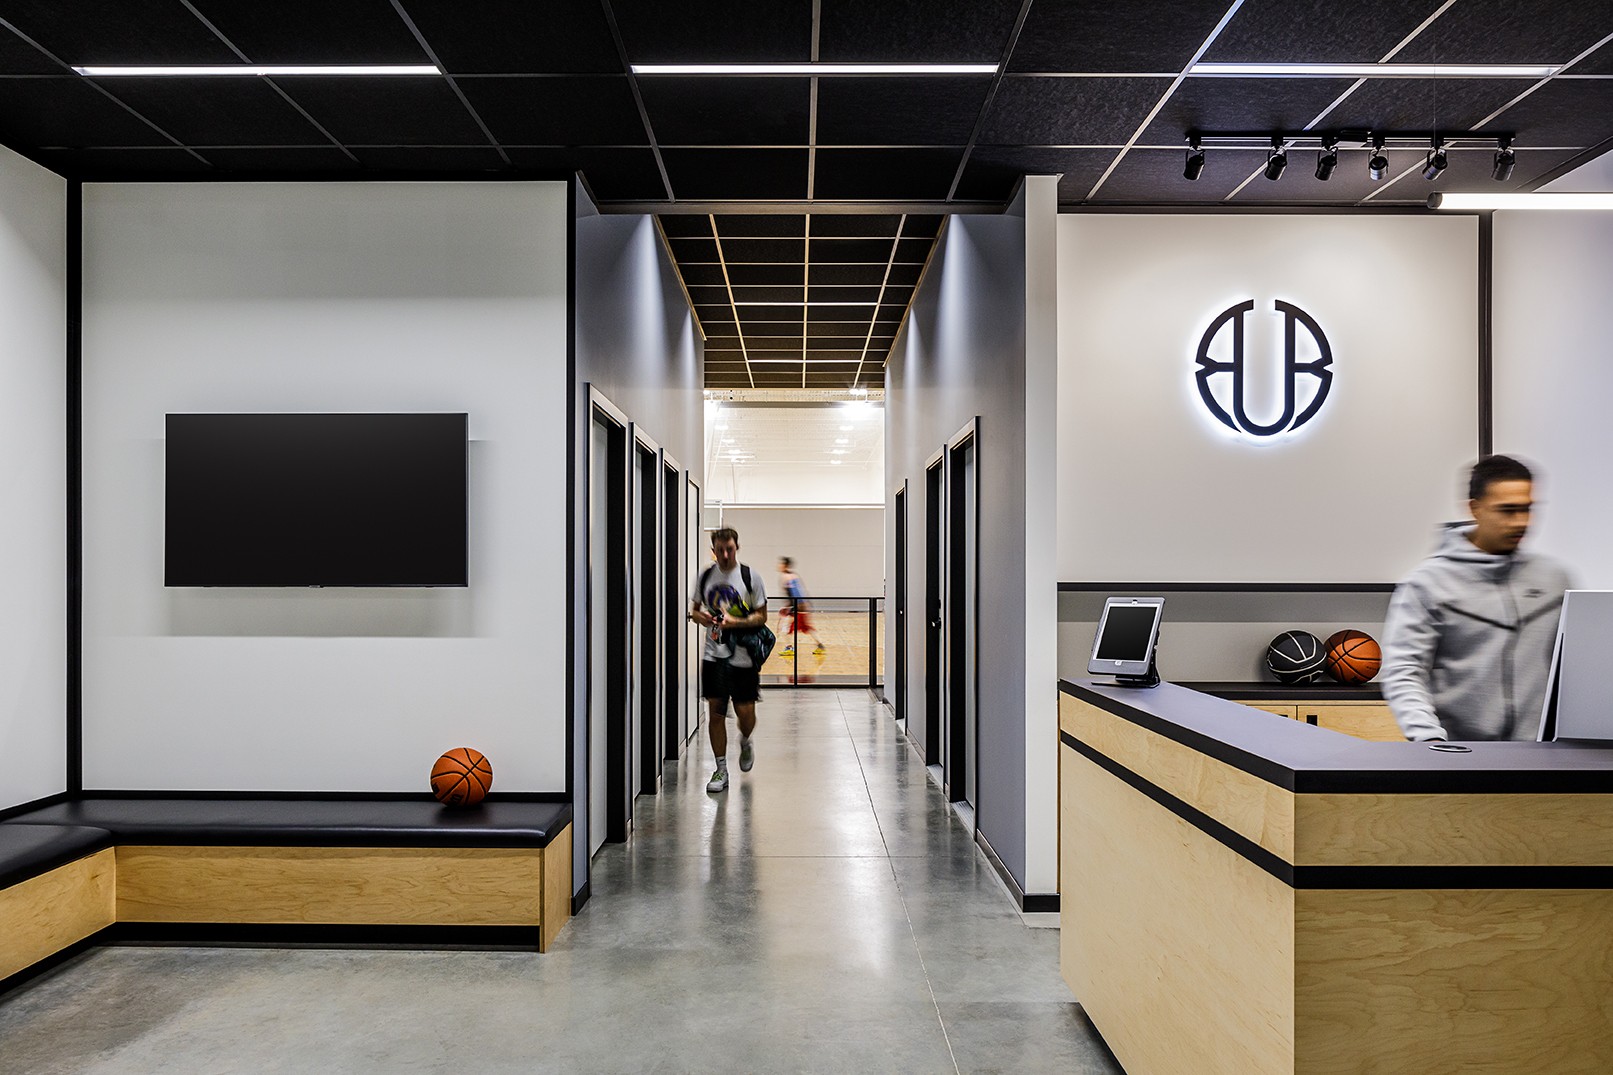 Union Basketball interior in Richmond BC, showing check in desk and hallway looking towards the gym